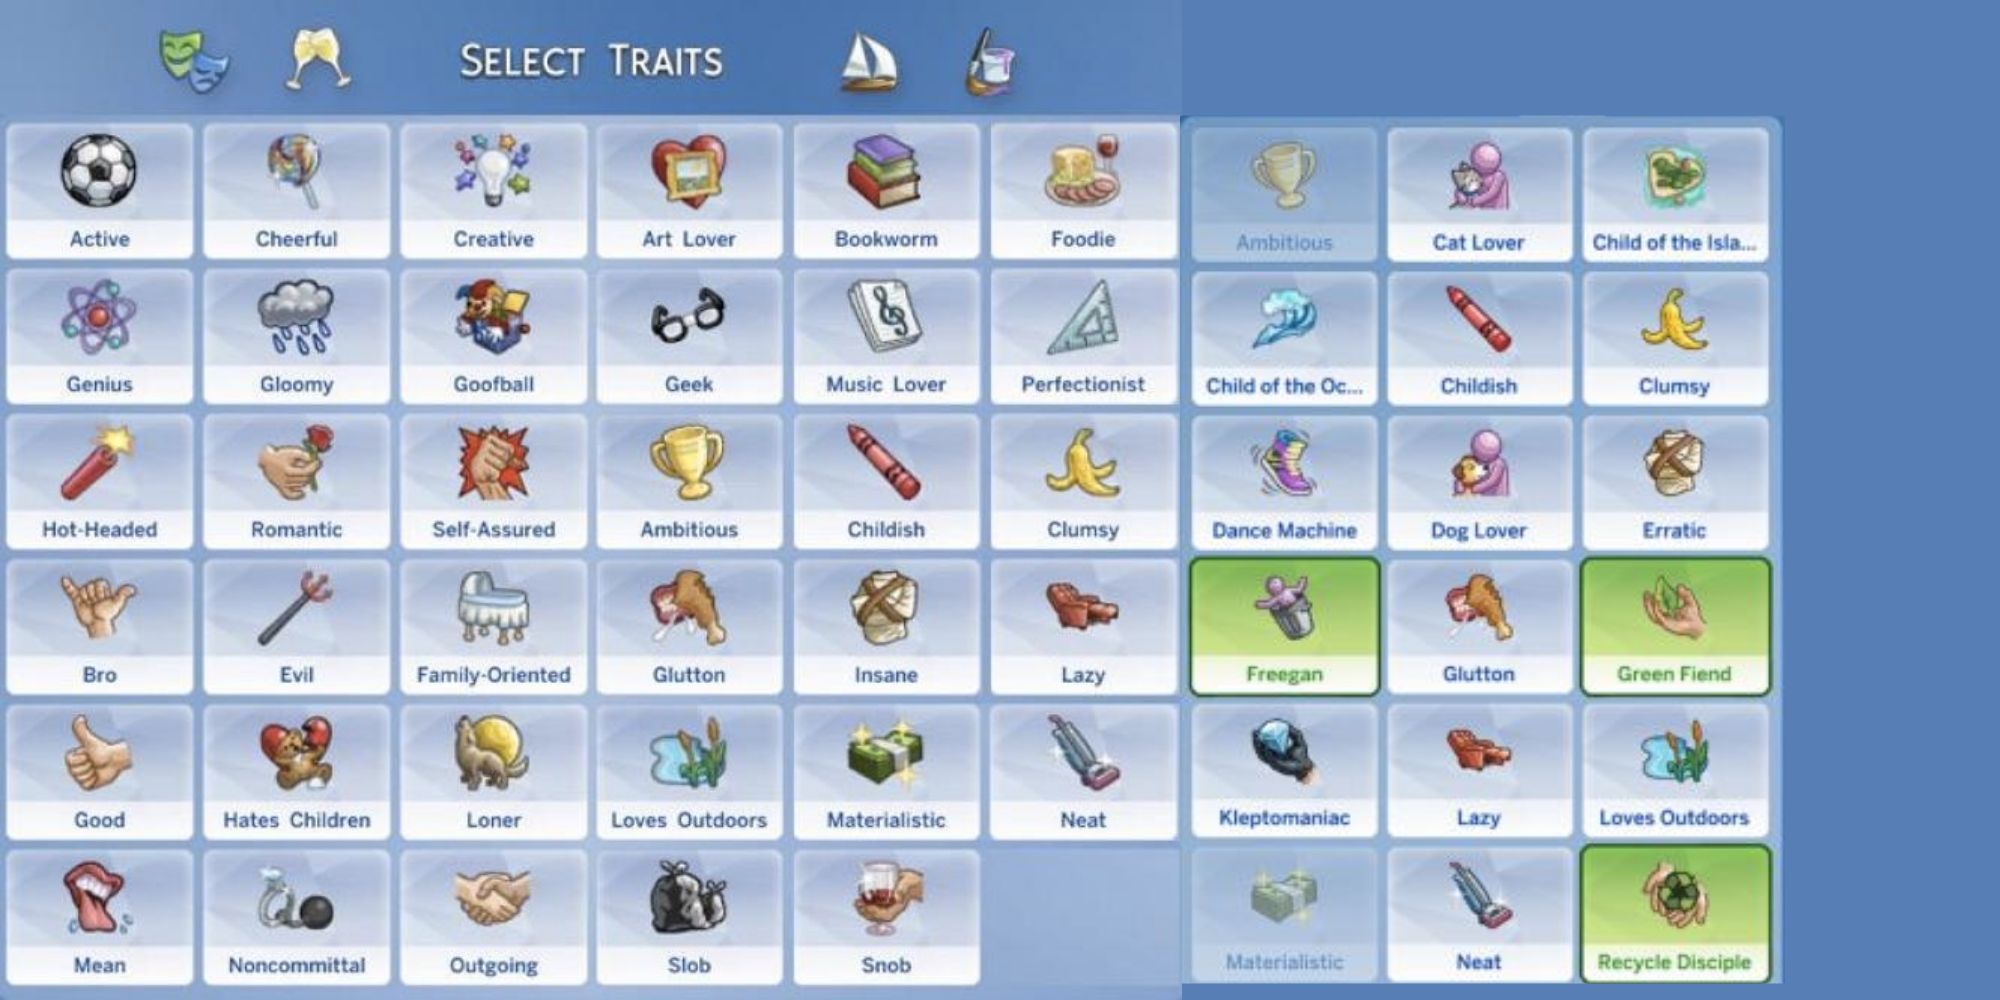 The Sims 4 Traits